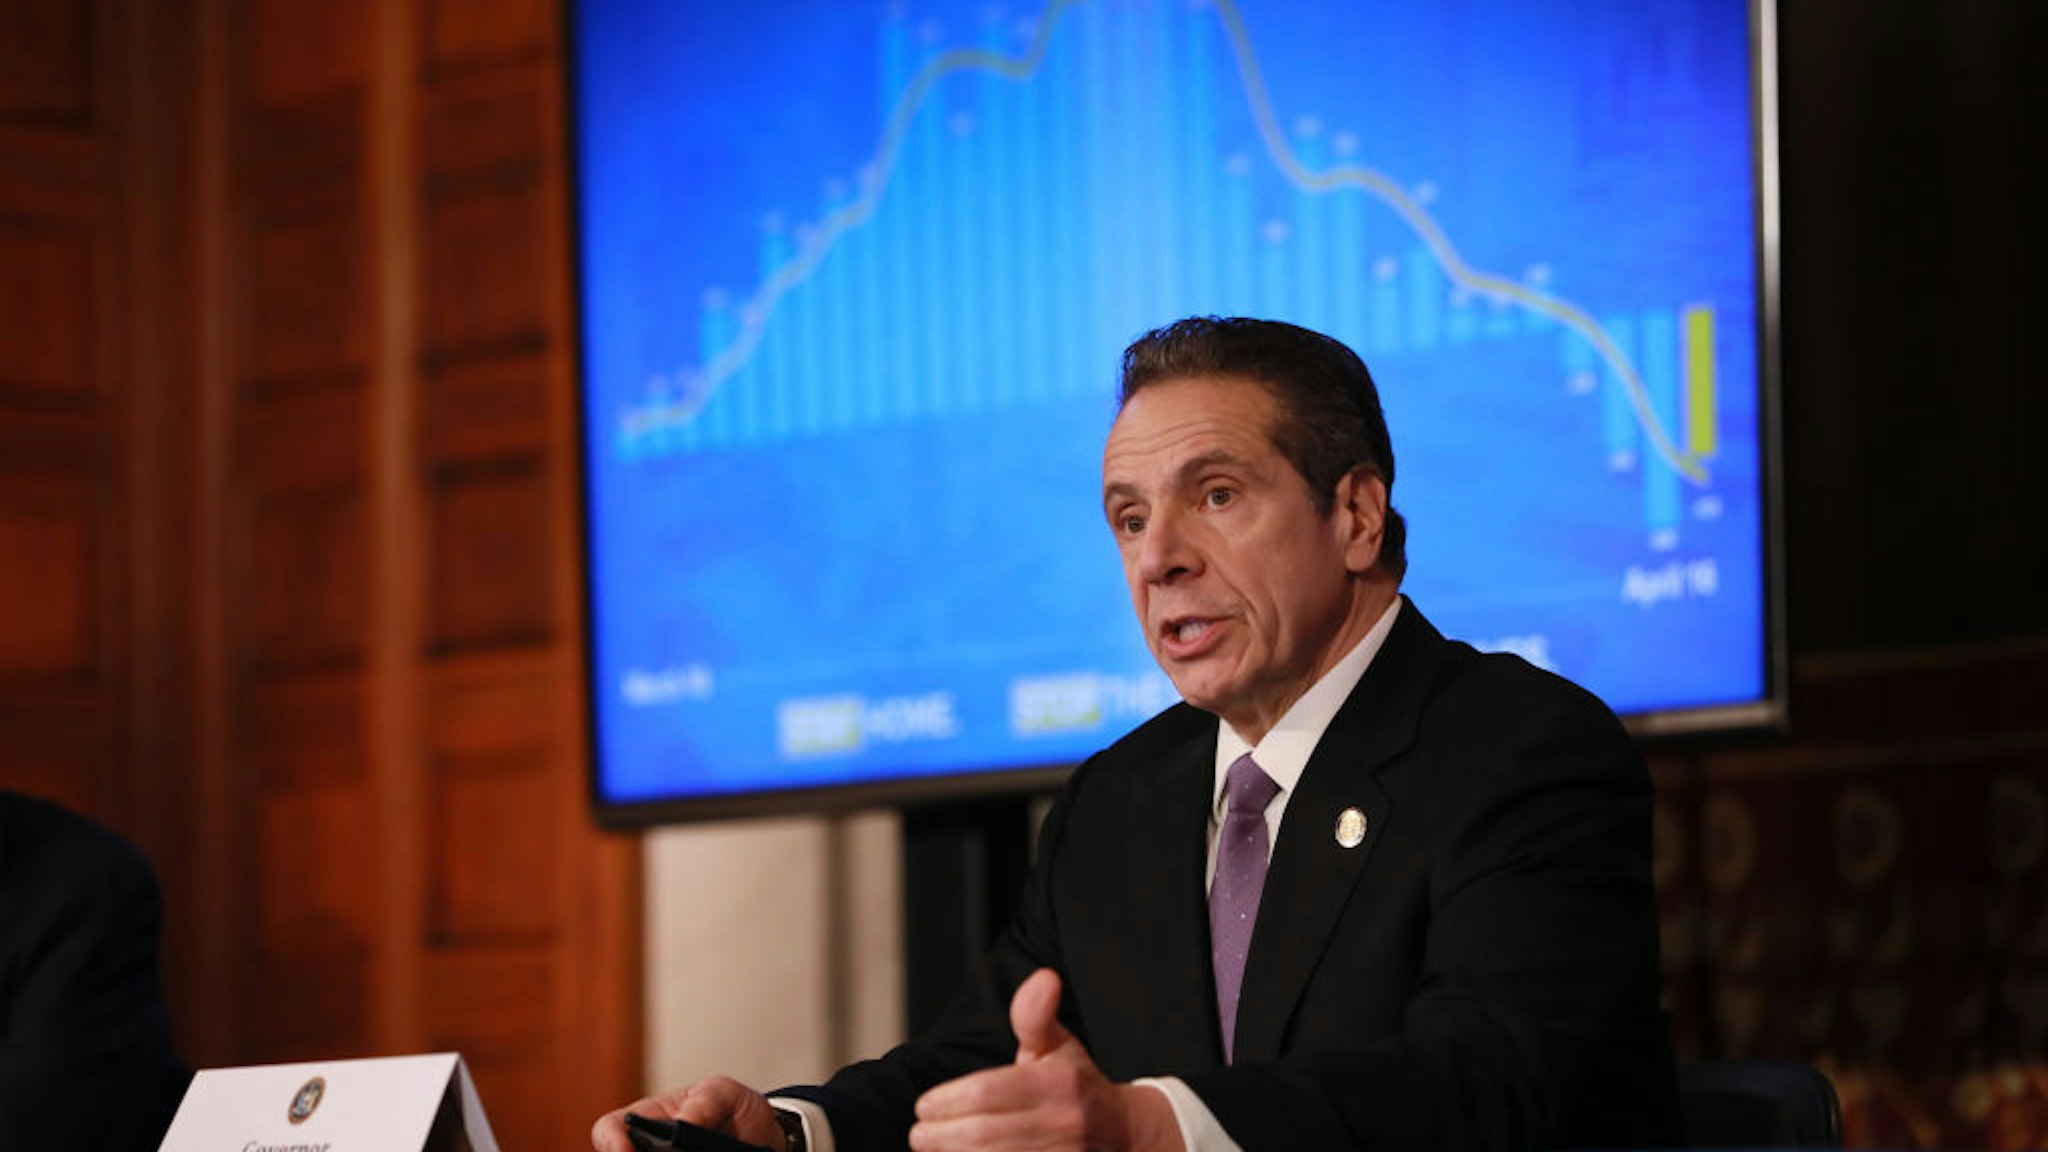 ALBANY, NY - APRIL 17: New York Governor Andrew Cuomo gives his a press briefing about the coronavirus crisis on April 17, 2020 in Albany, New York.Cuomo along with governors from other East Coast states are extending their shutdown of nonessential businesses to May 15. “We have to continue doing what we’re doing. I’d like to see that infection rate get down even more...", he said. (Photo by Matthew Cavanaugh/Getty Images)